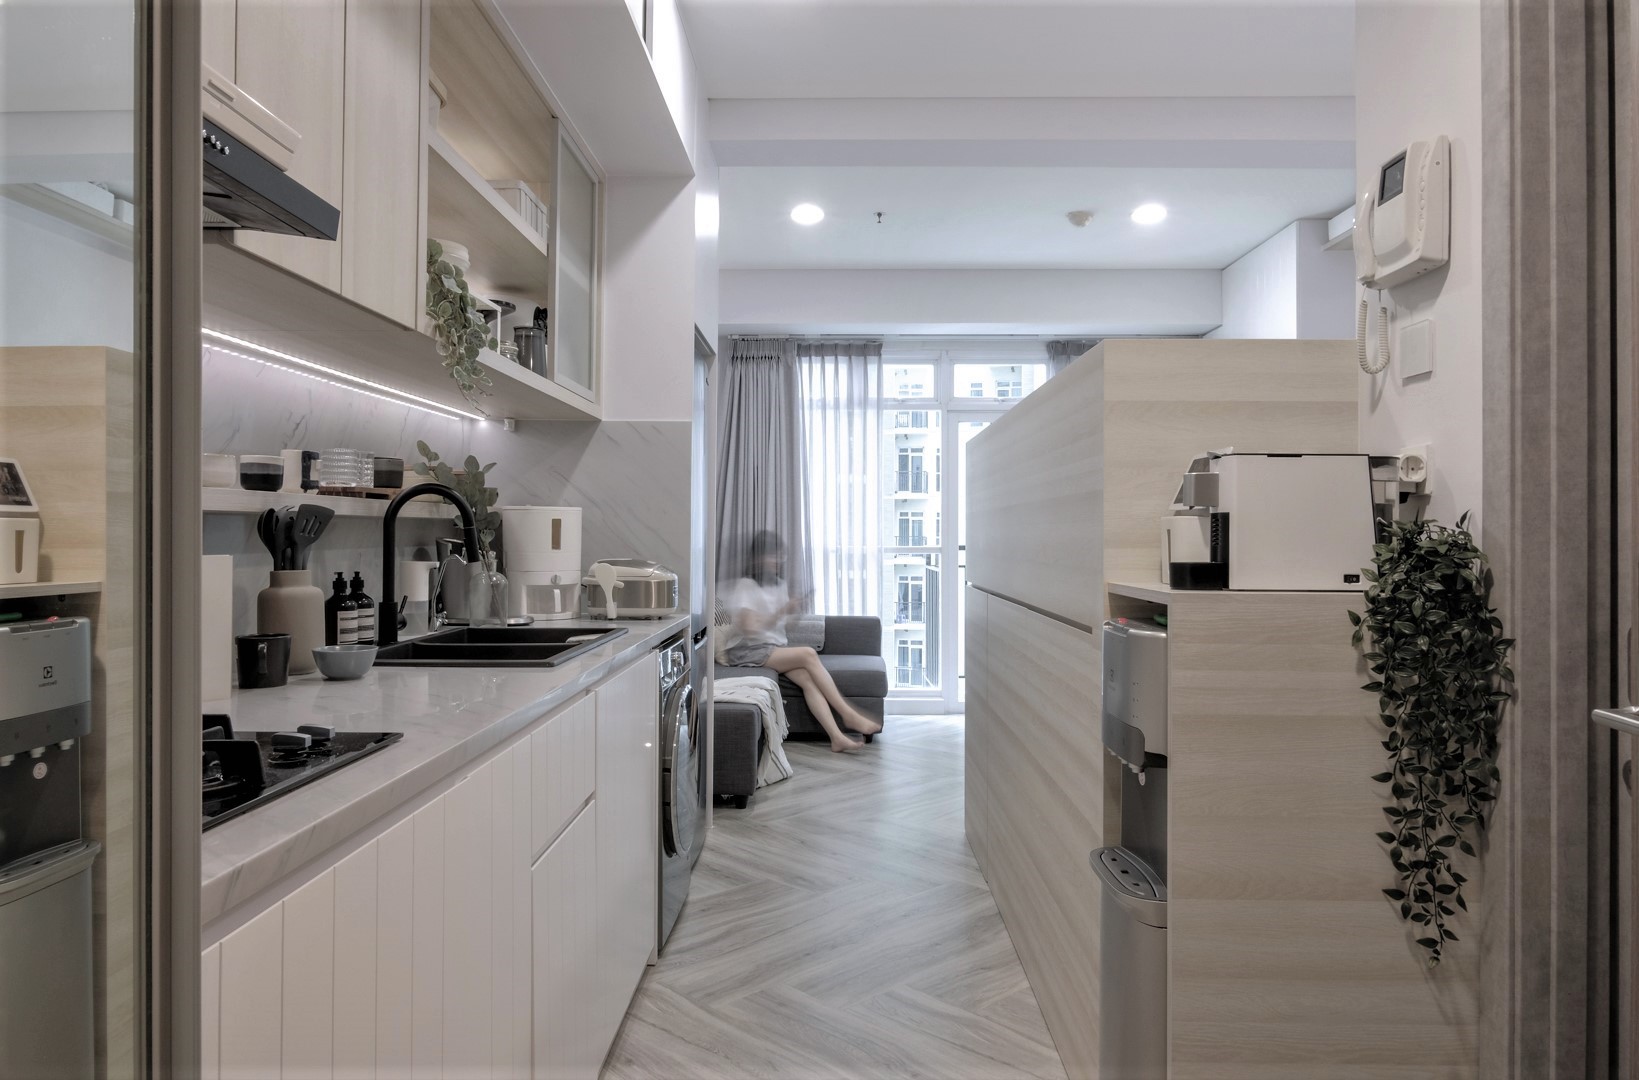 A small remodeled micro apartment that includes a full kitchen, a loft bed, and a bathroom.